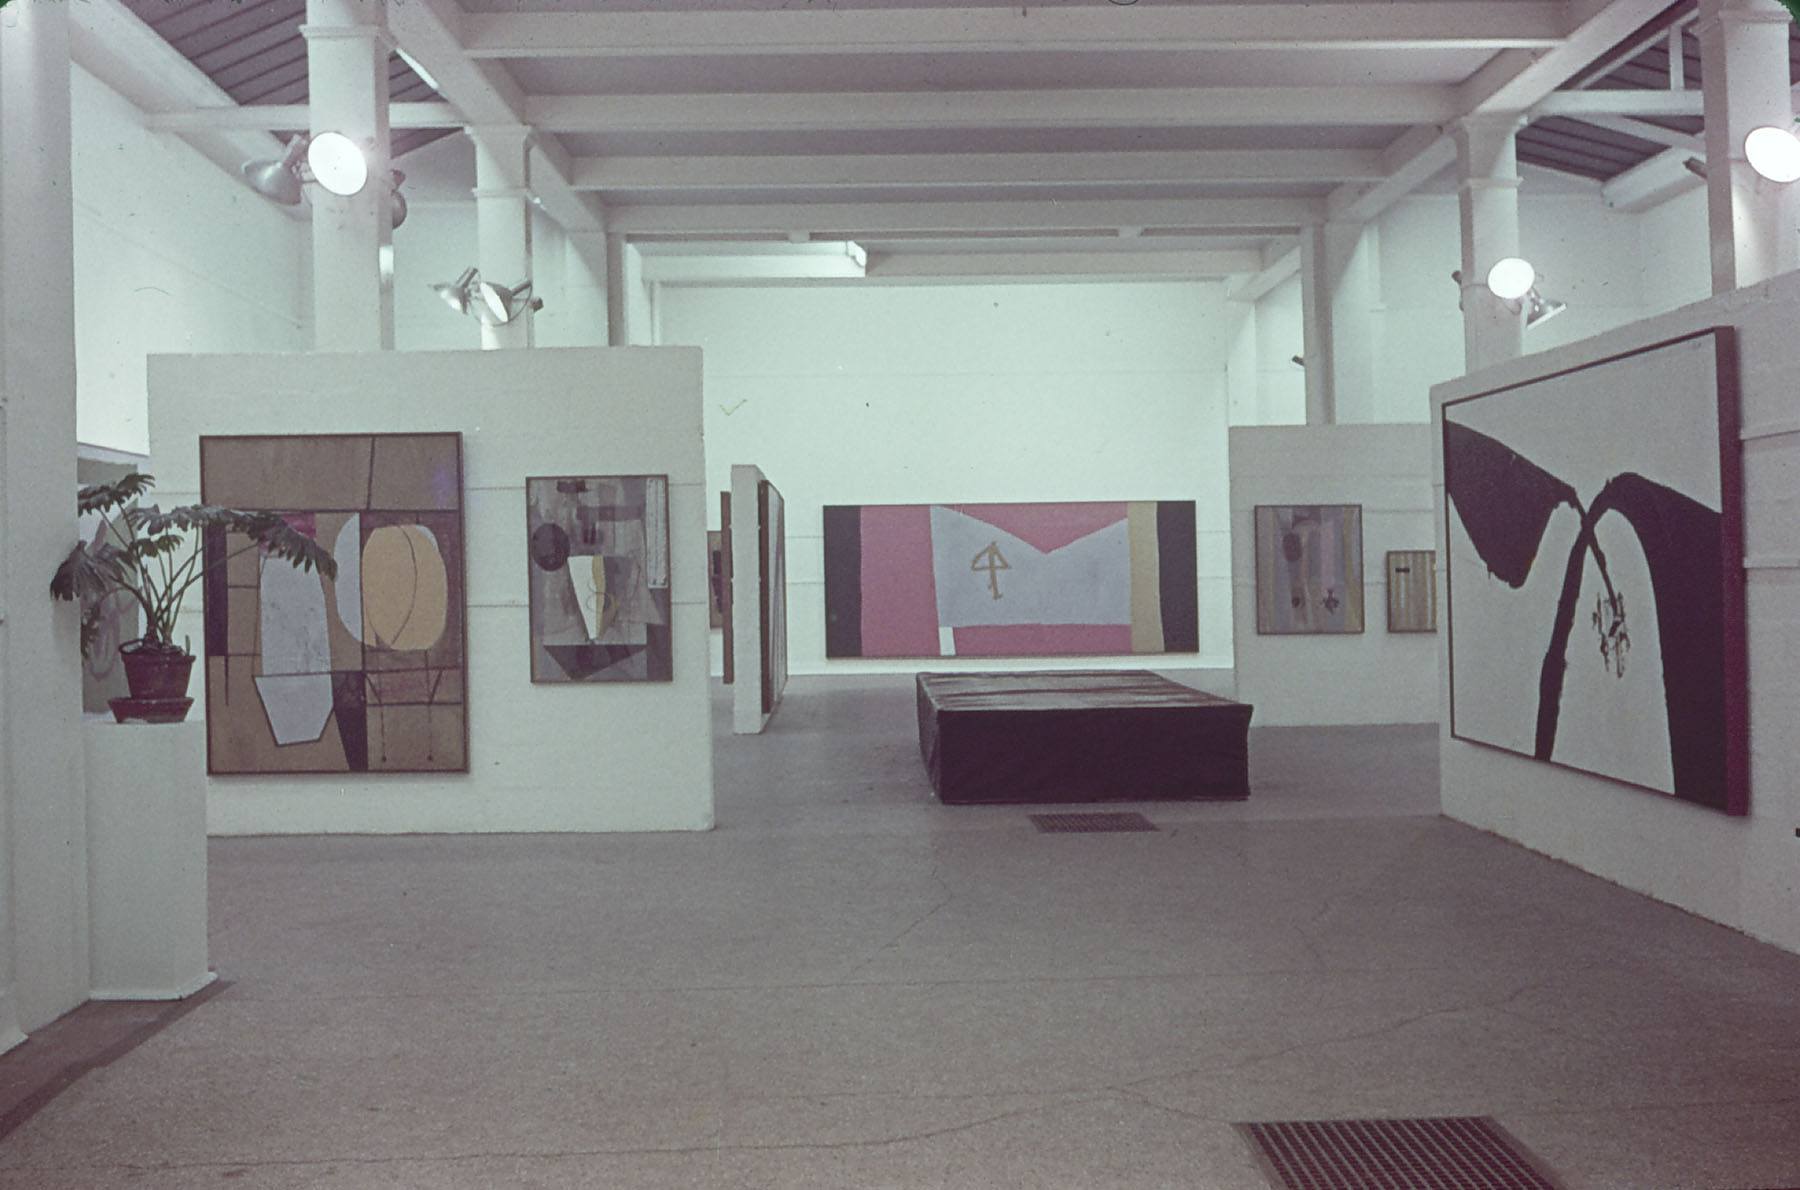 Motherwell’s 1965 retrospective installed at the Whitechapel Gallery